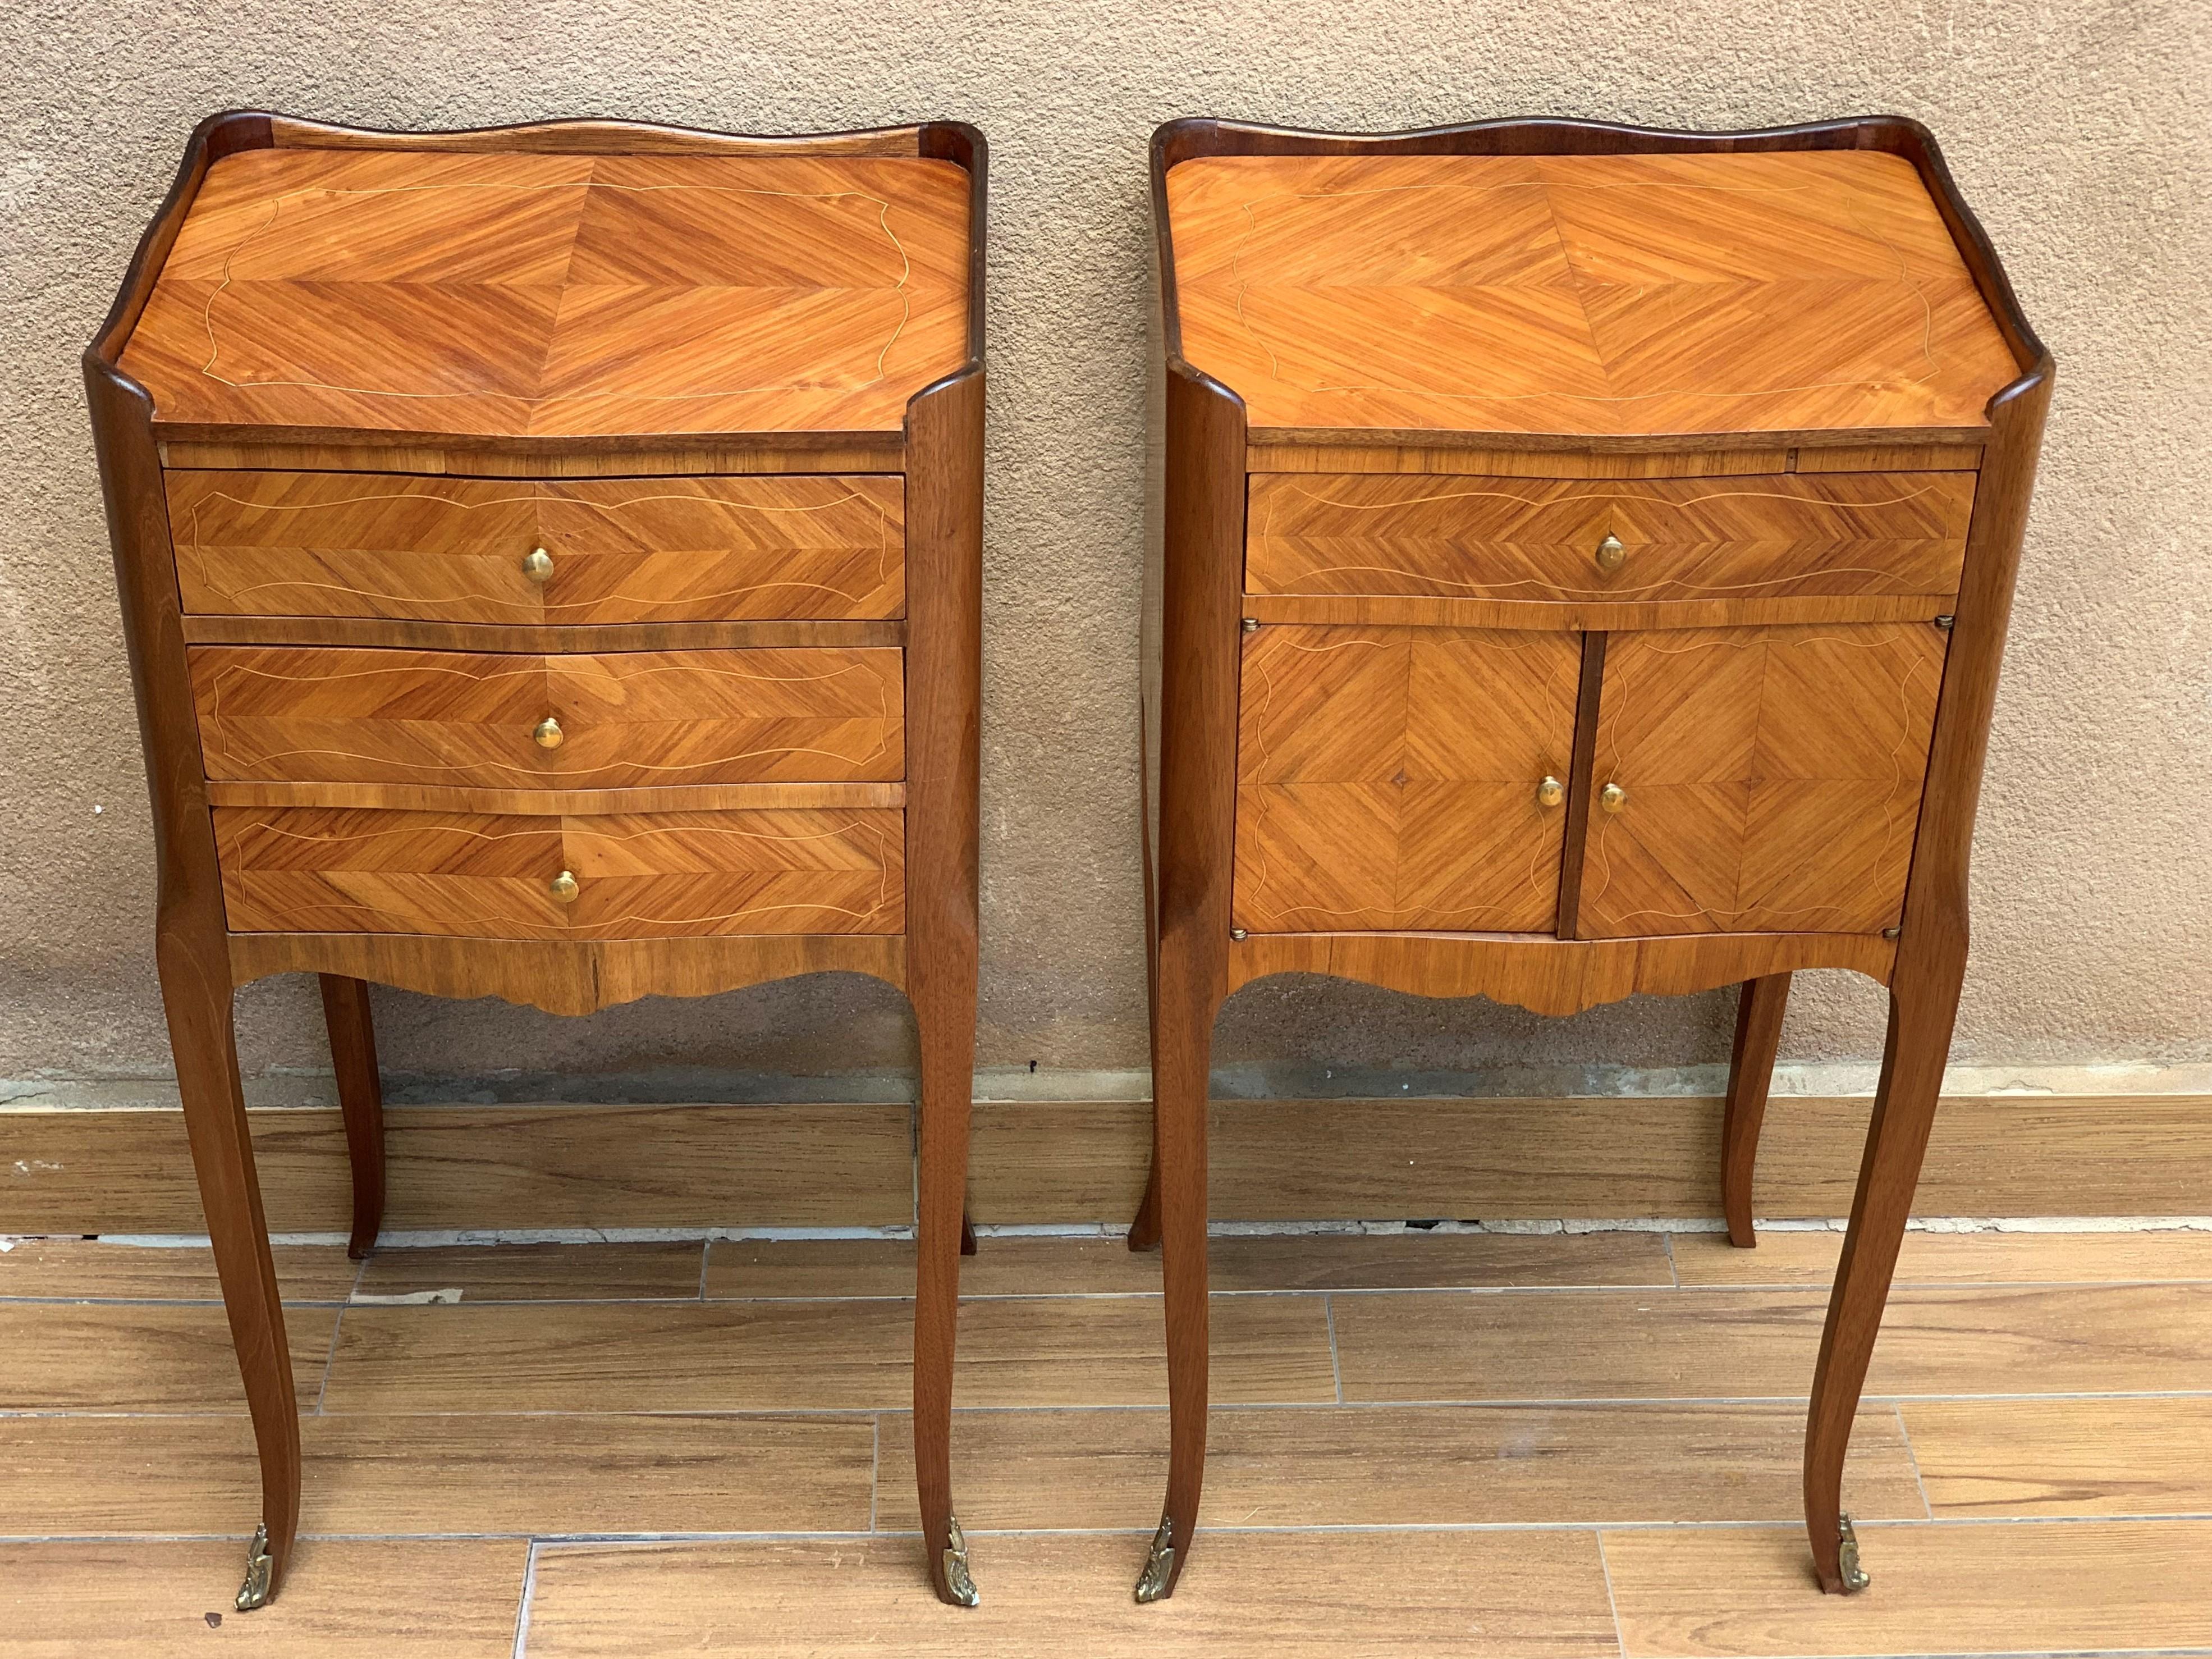 Pair of French Marquetry Walnut Bedside Matching Tables with Drawers and Door (Französisch)